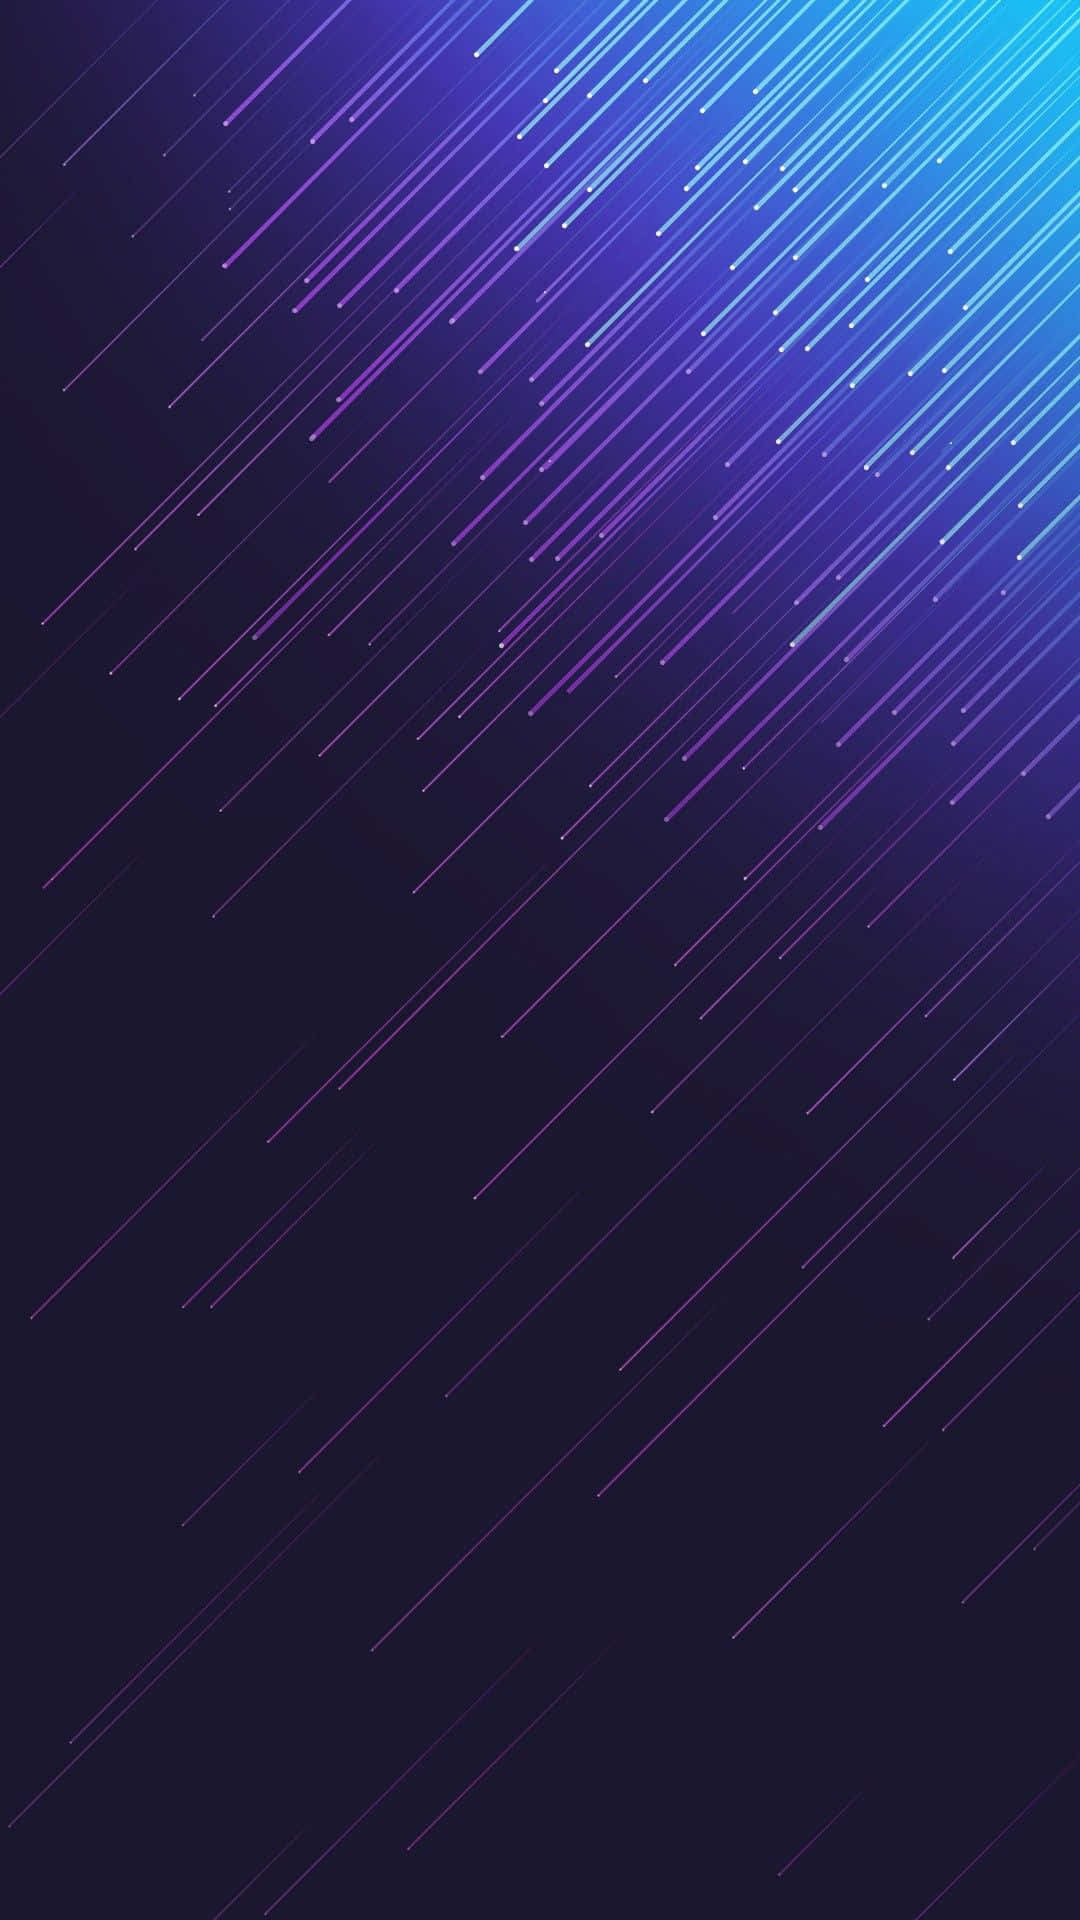 A Purple And Blue Background With Lines Wallpaper